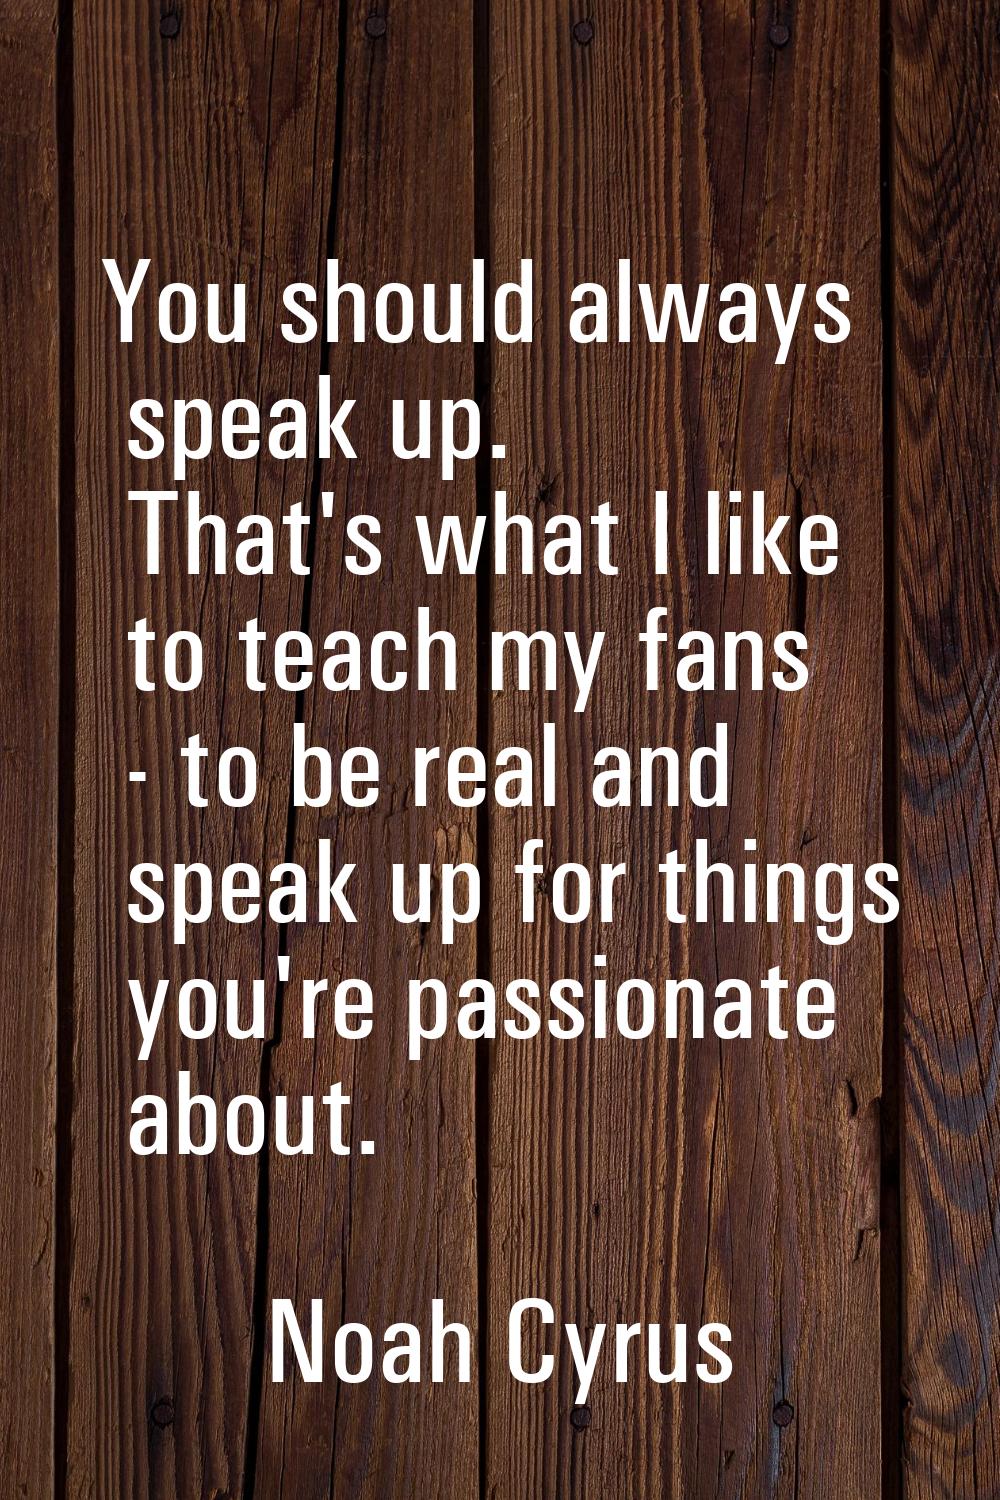 You should always speak up. That's what I like to teach my fans - to be real and speak up for thing